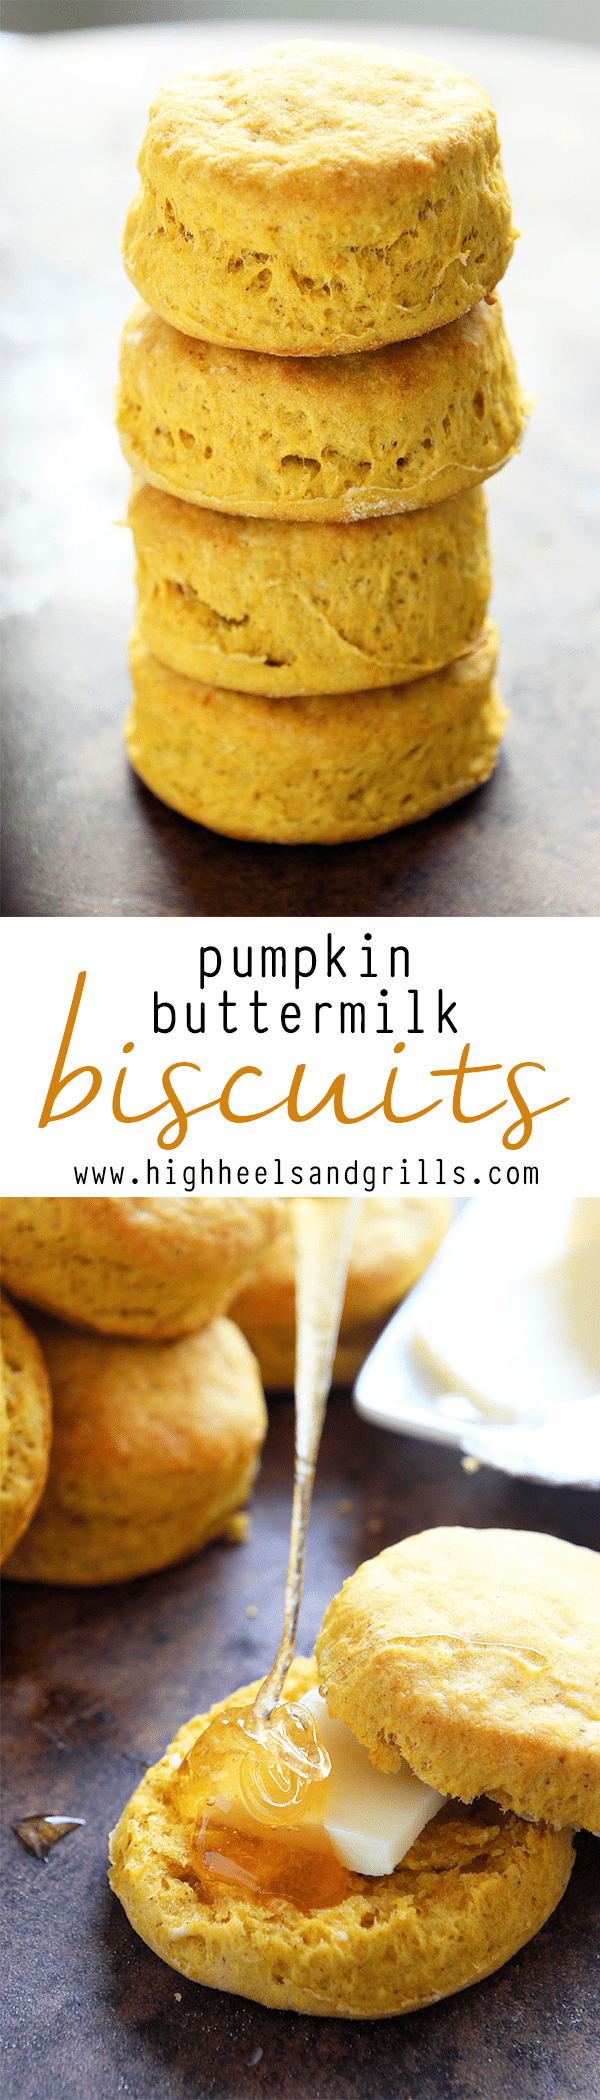 These Pumpkin Buttermilk Biscuits are tall, fluffy, and pumpkiny. They make a great fall food side dish for your favorite fall time meal!